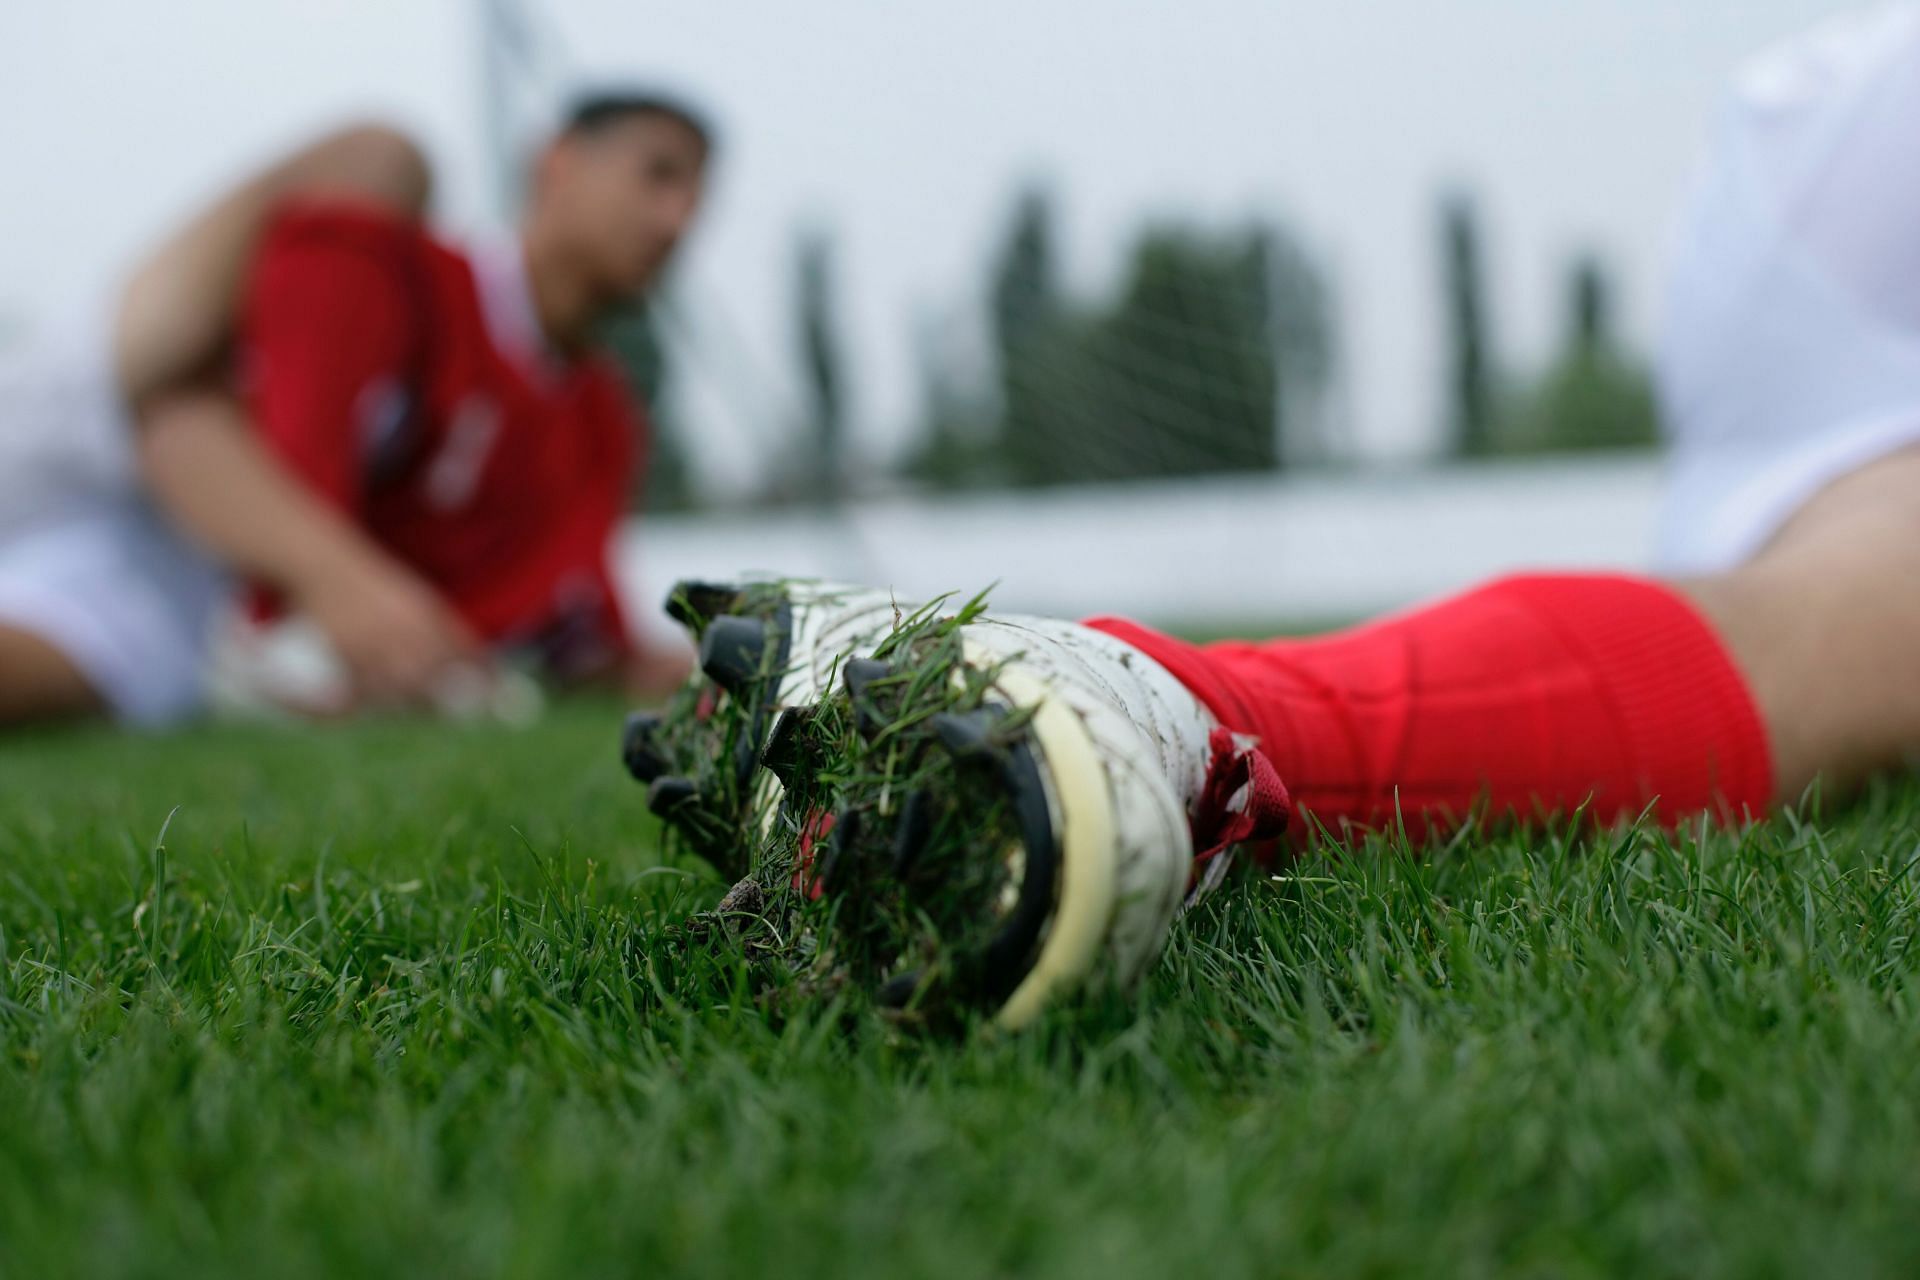 A good athlete treats any injury as soon as possible and takes time out to rest.